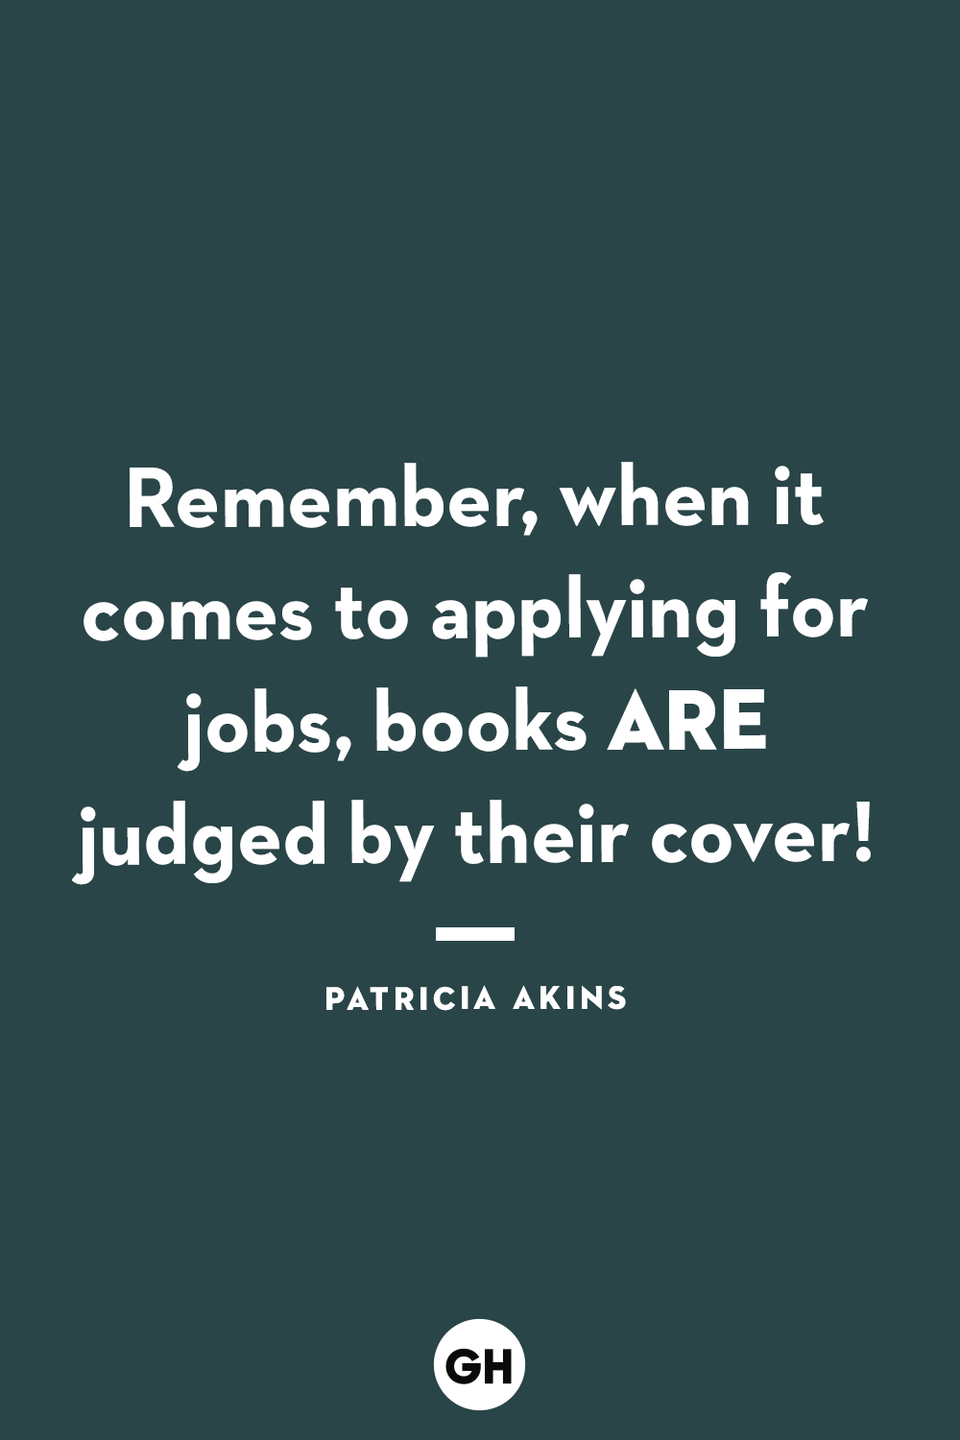 <p>Remember, when it comes to applying for jobs, books are judged by their cover!</p>